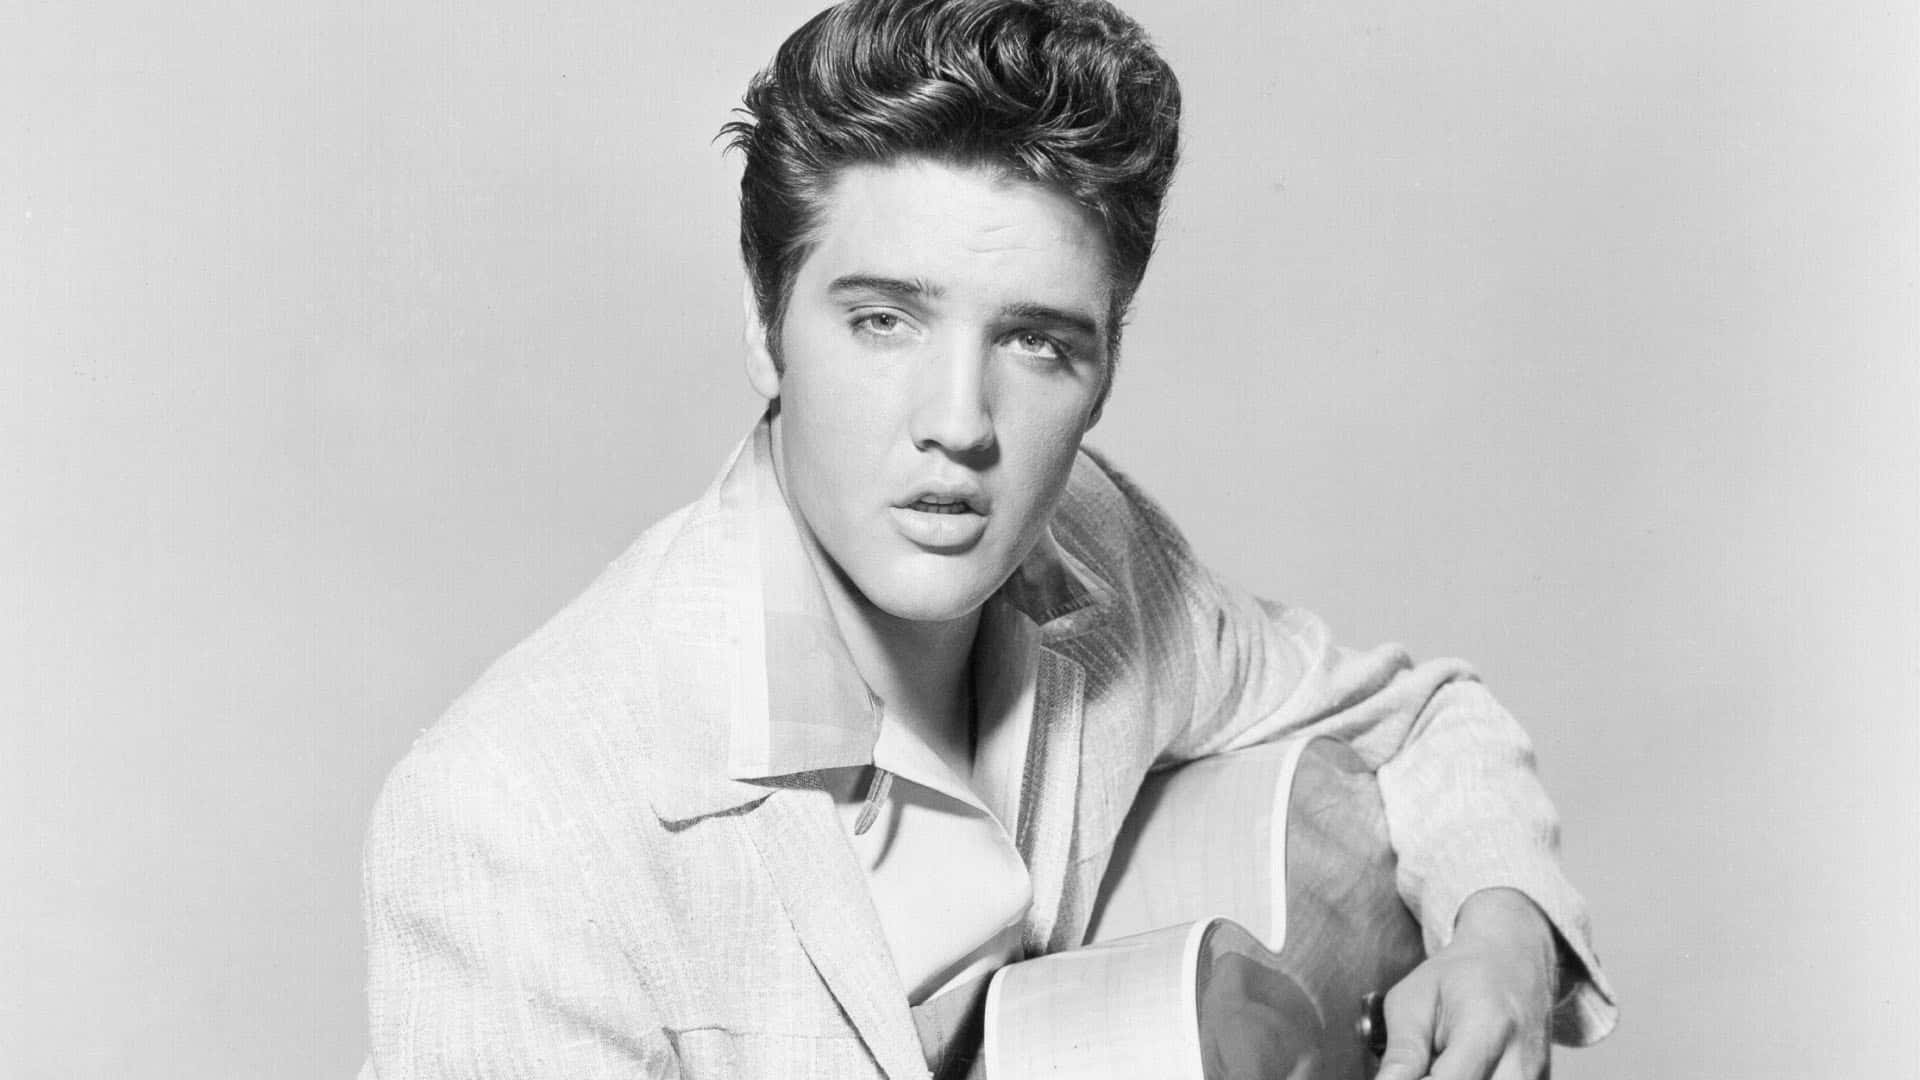 Elvis Presley, the King of Rock and Roll